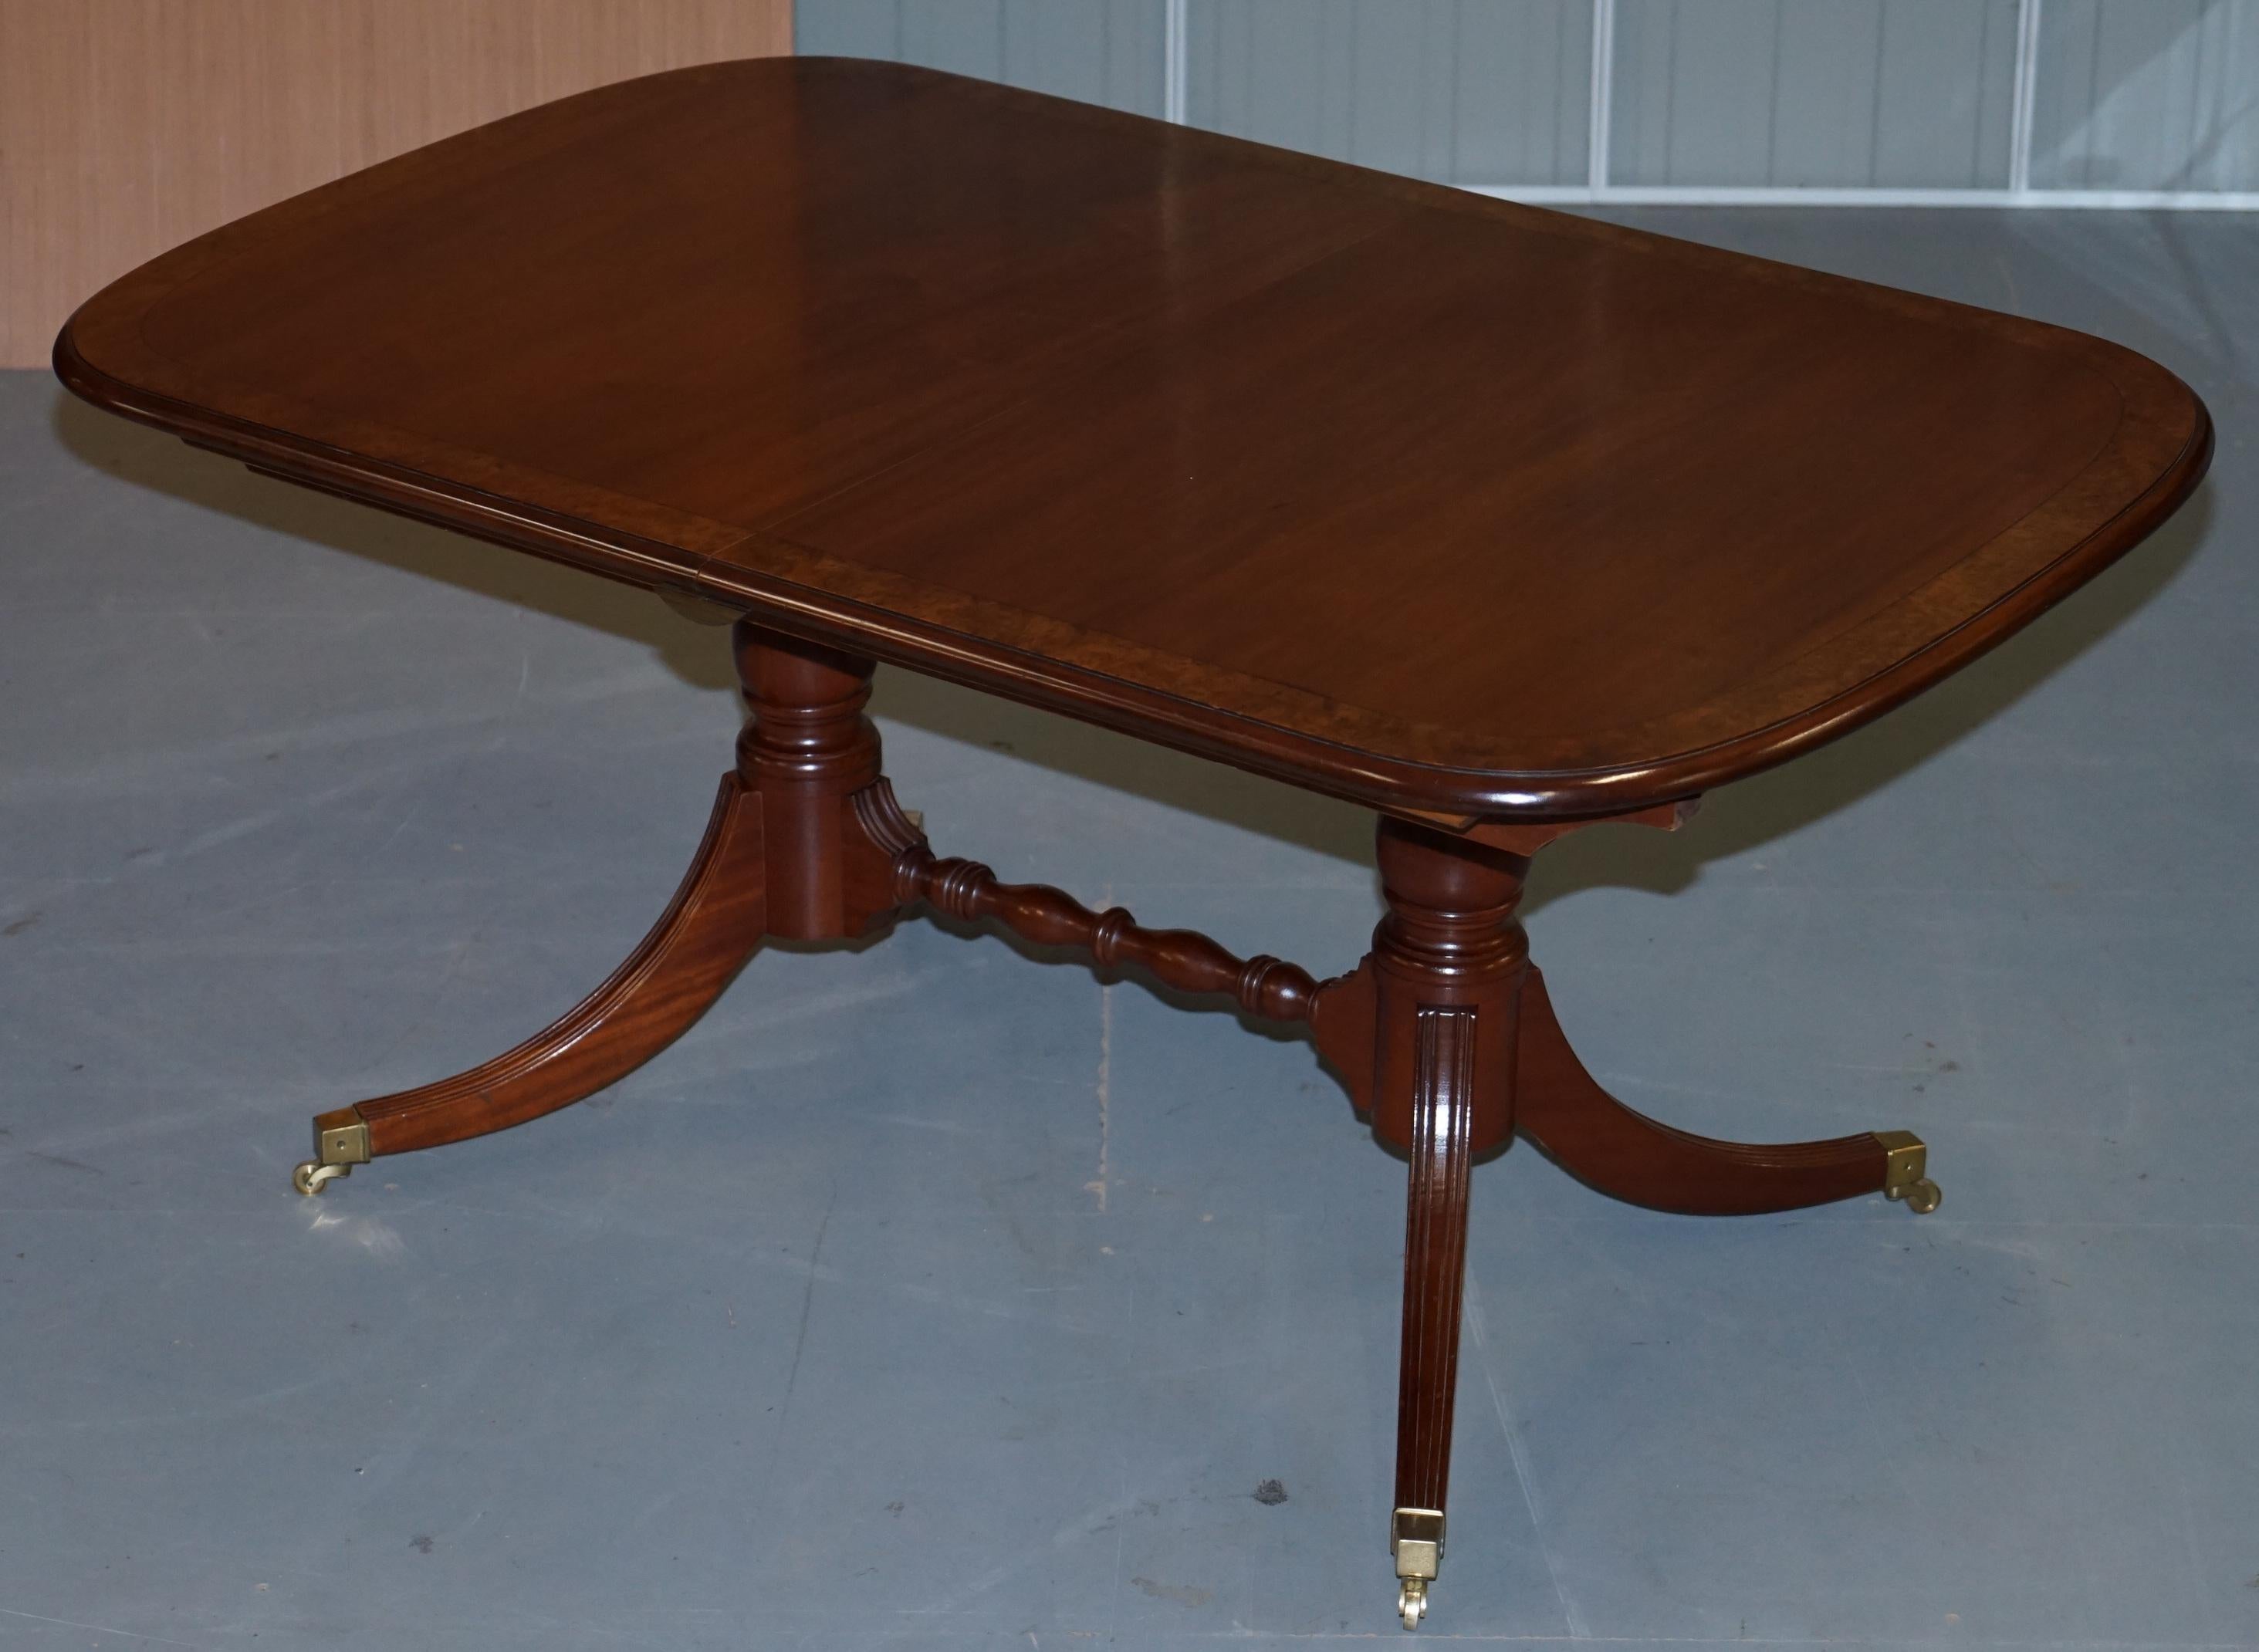 We are delighted to offer this absolutely stunning Brights of Nettlebed Regency style extending dining table and six chairs in Burr walnut and normal walnut RRP £9,100

A truly stunning suite, the extending table comfortably sits 6-8 people and up